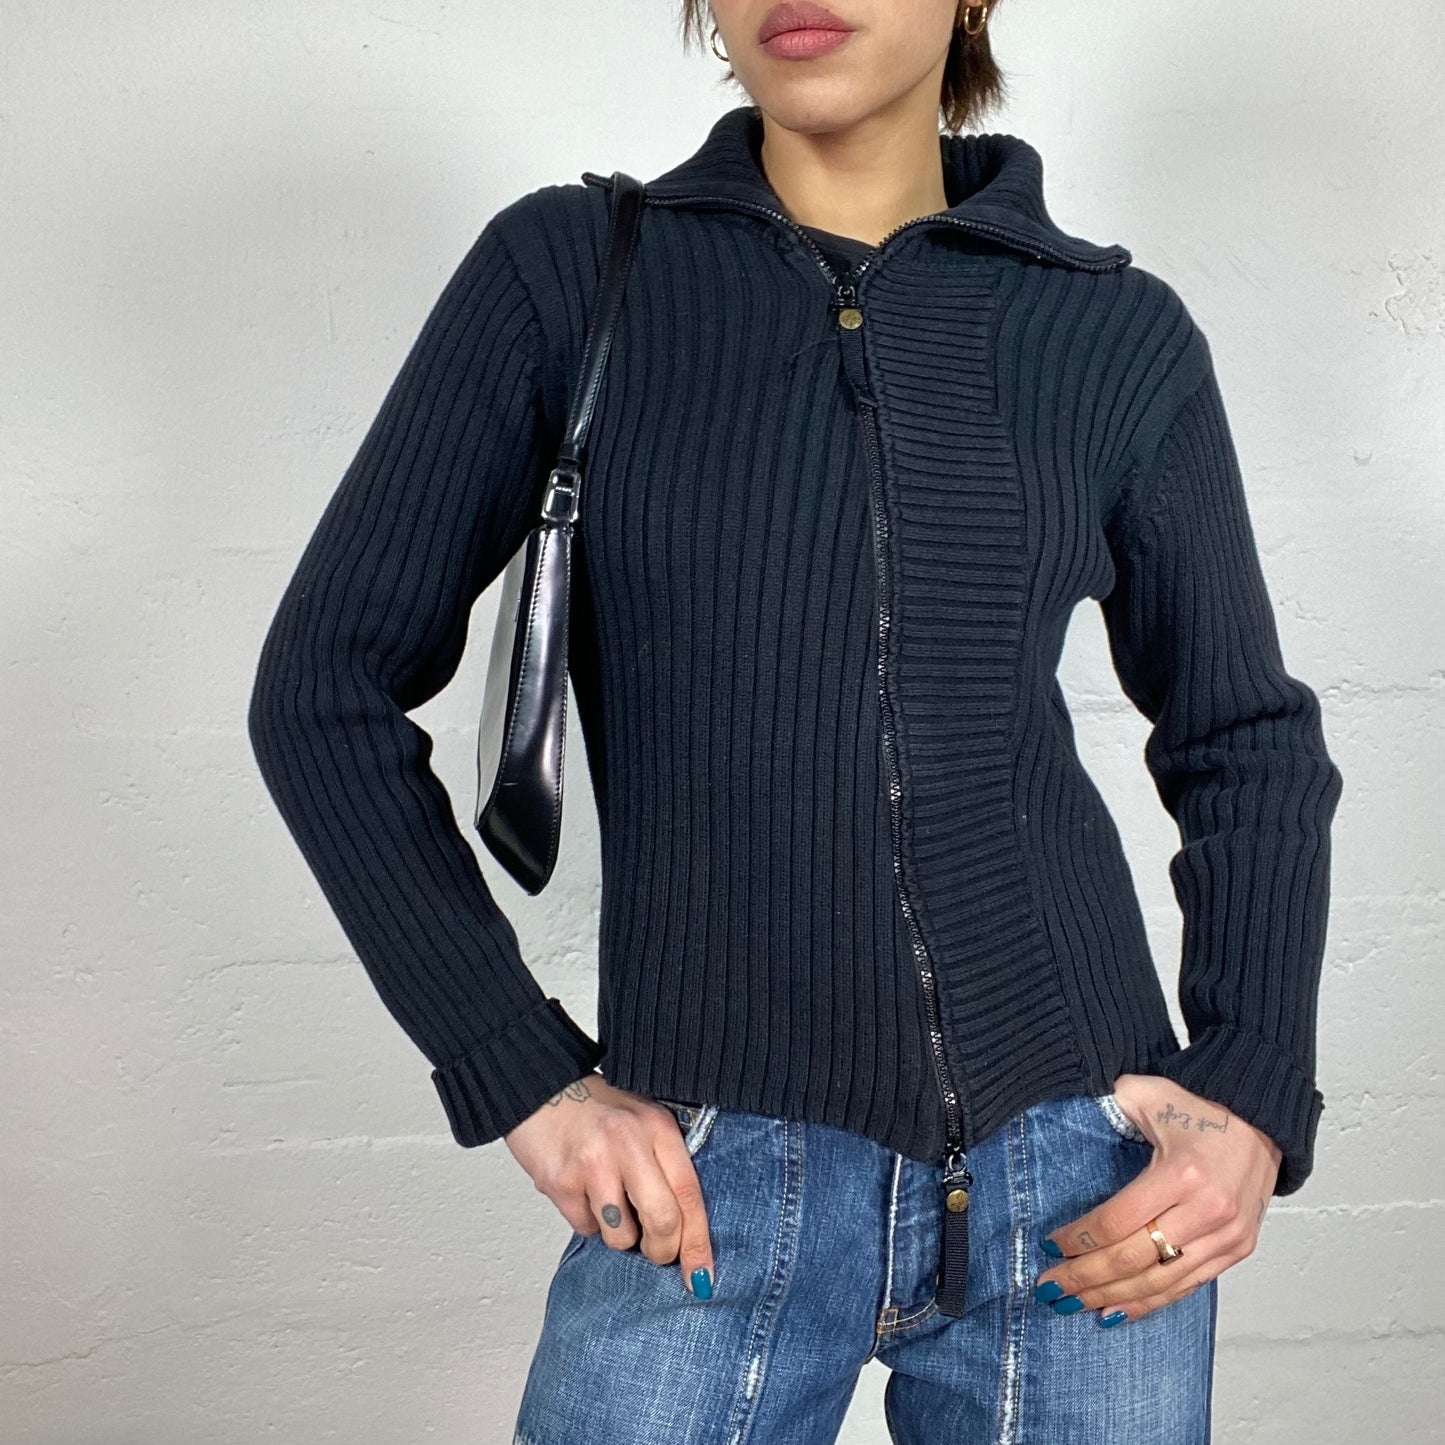 Vintage 2000's Sporty Black Asymmetric Zip Up Knitted Sweater (M)